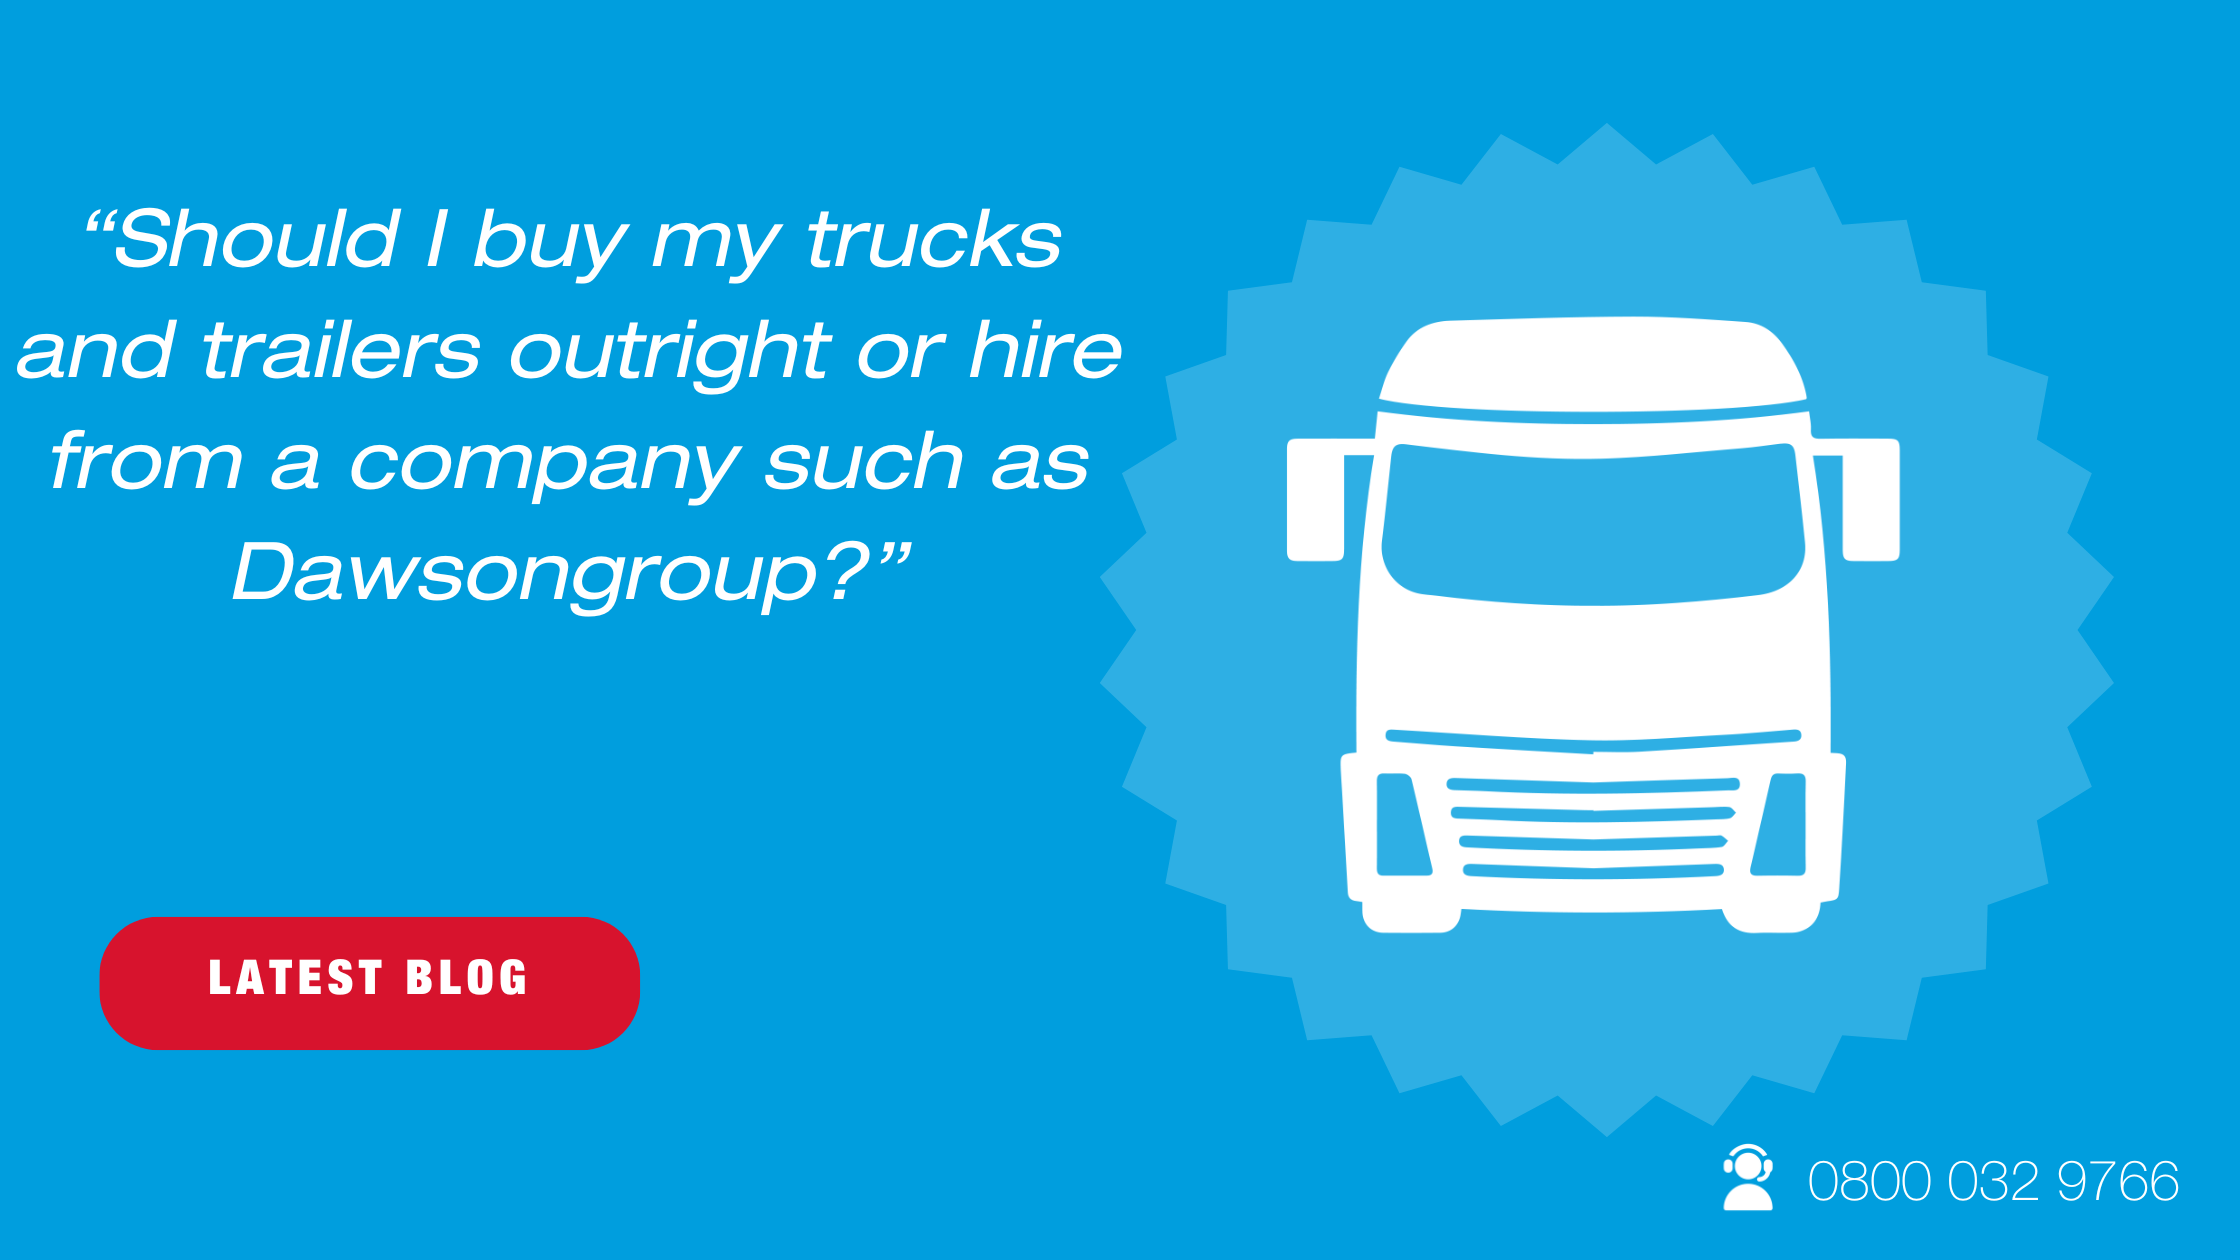 Is it better to buy your trucks and trailers or to hire them from a company like Dawsongroup